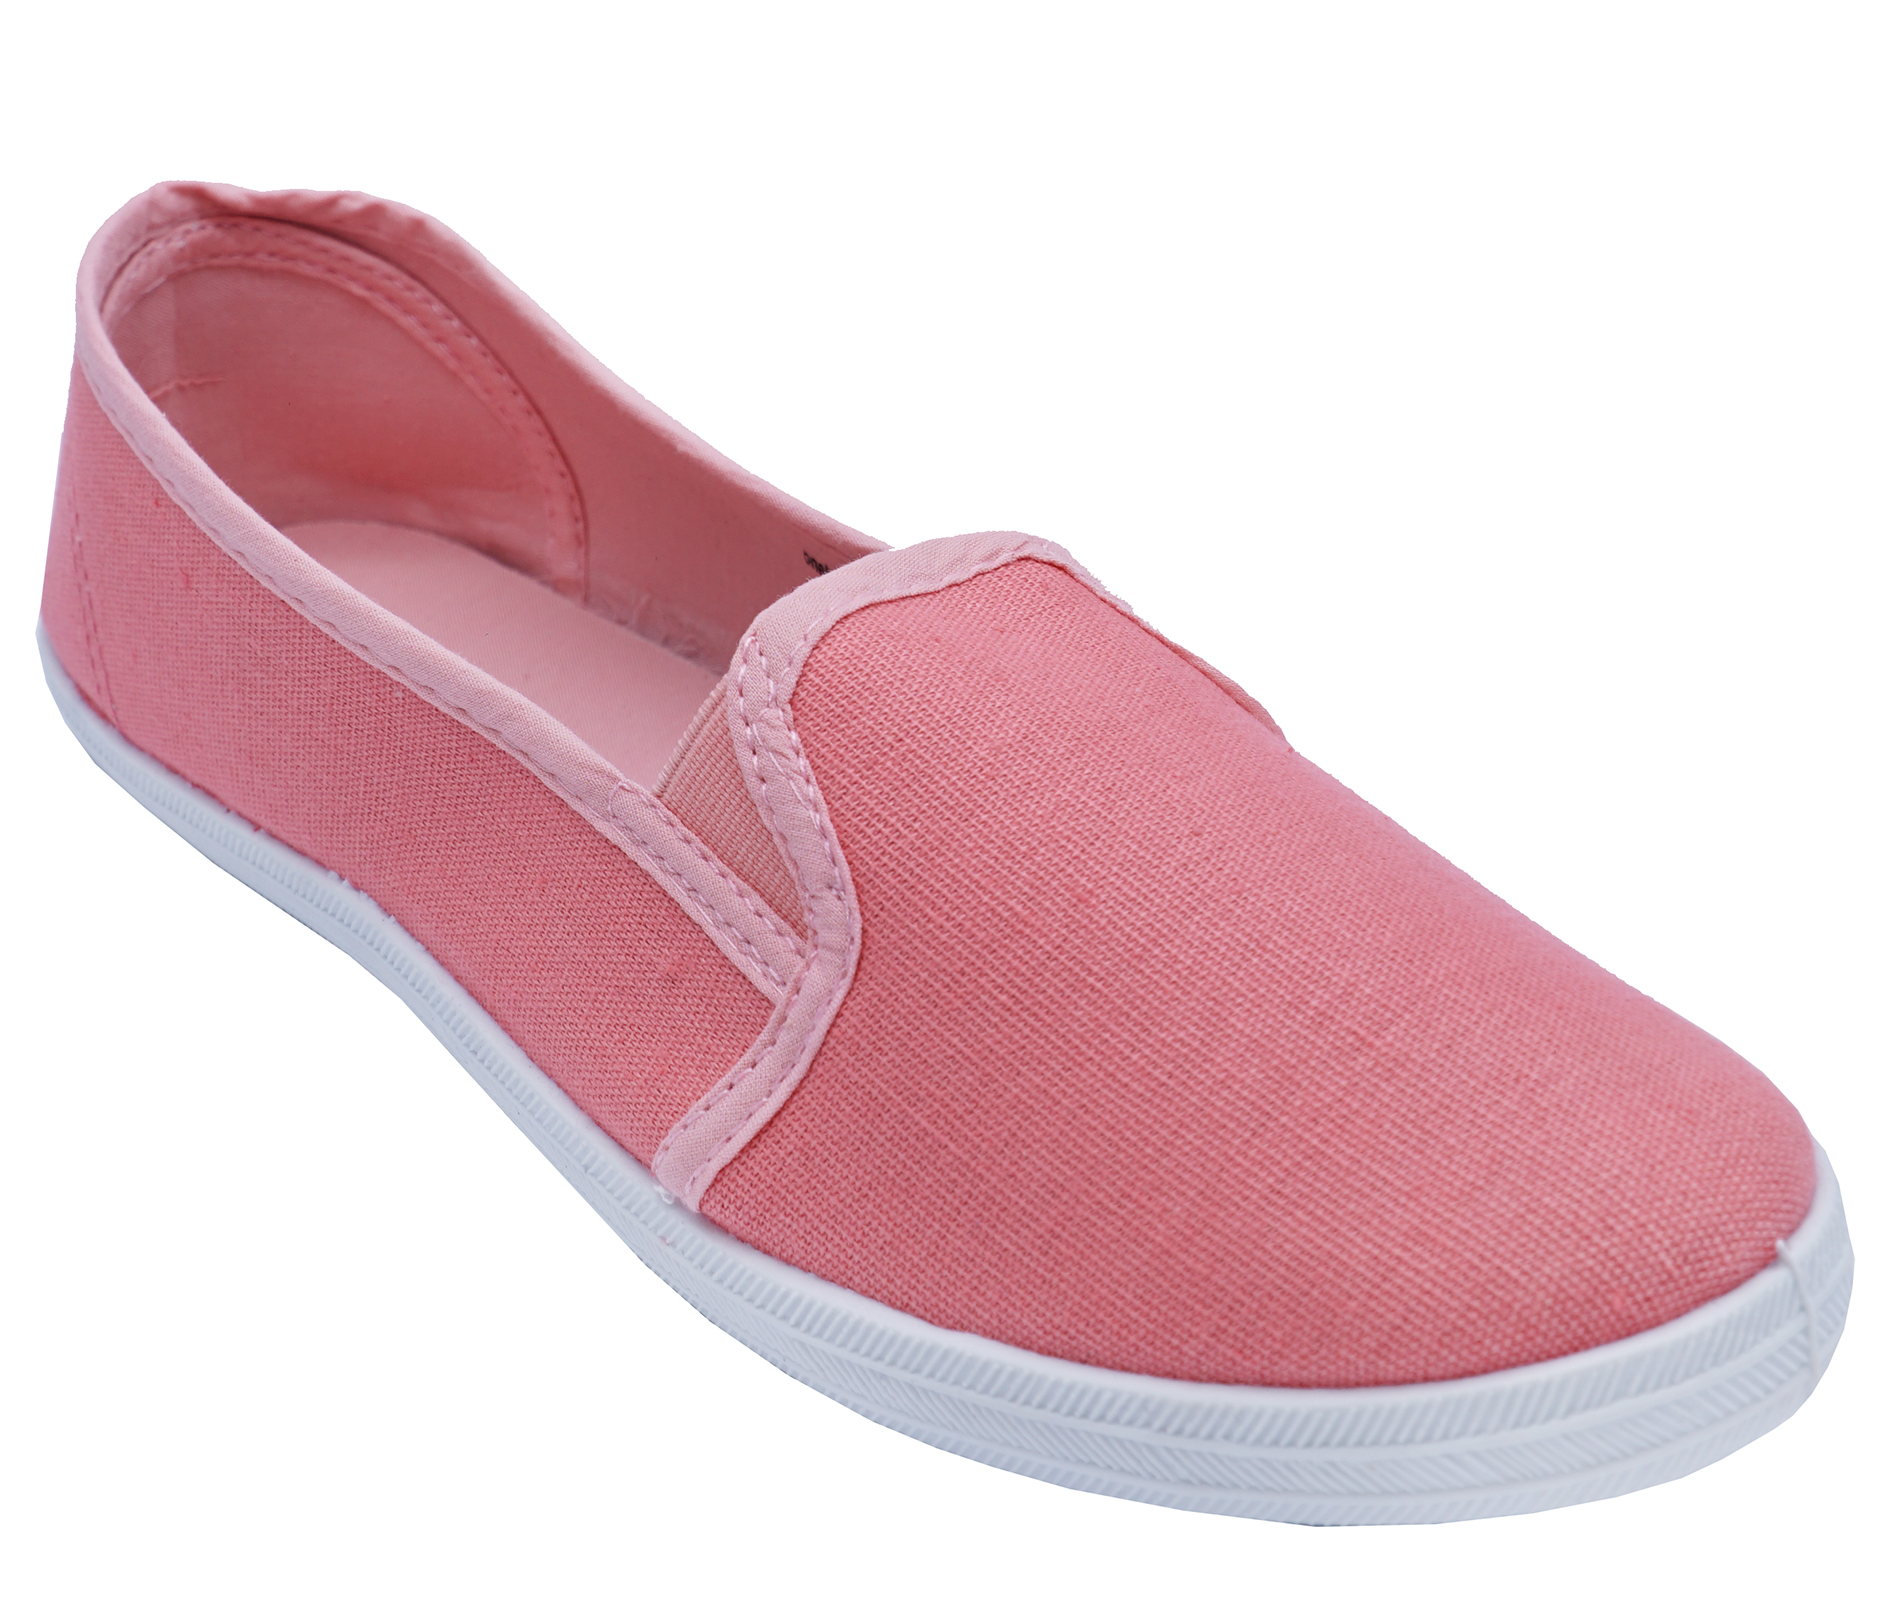 LADIES PINK CANVAS FLAT SLIP-ON PLIMSOLL PUMPS COMFY CASUAL SHOES SIZES ...